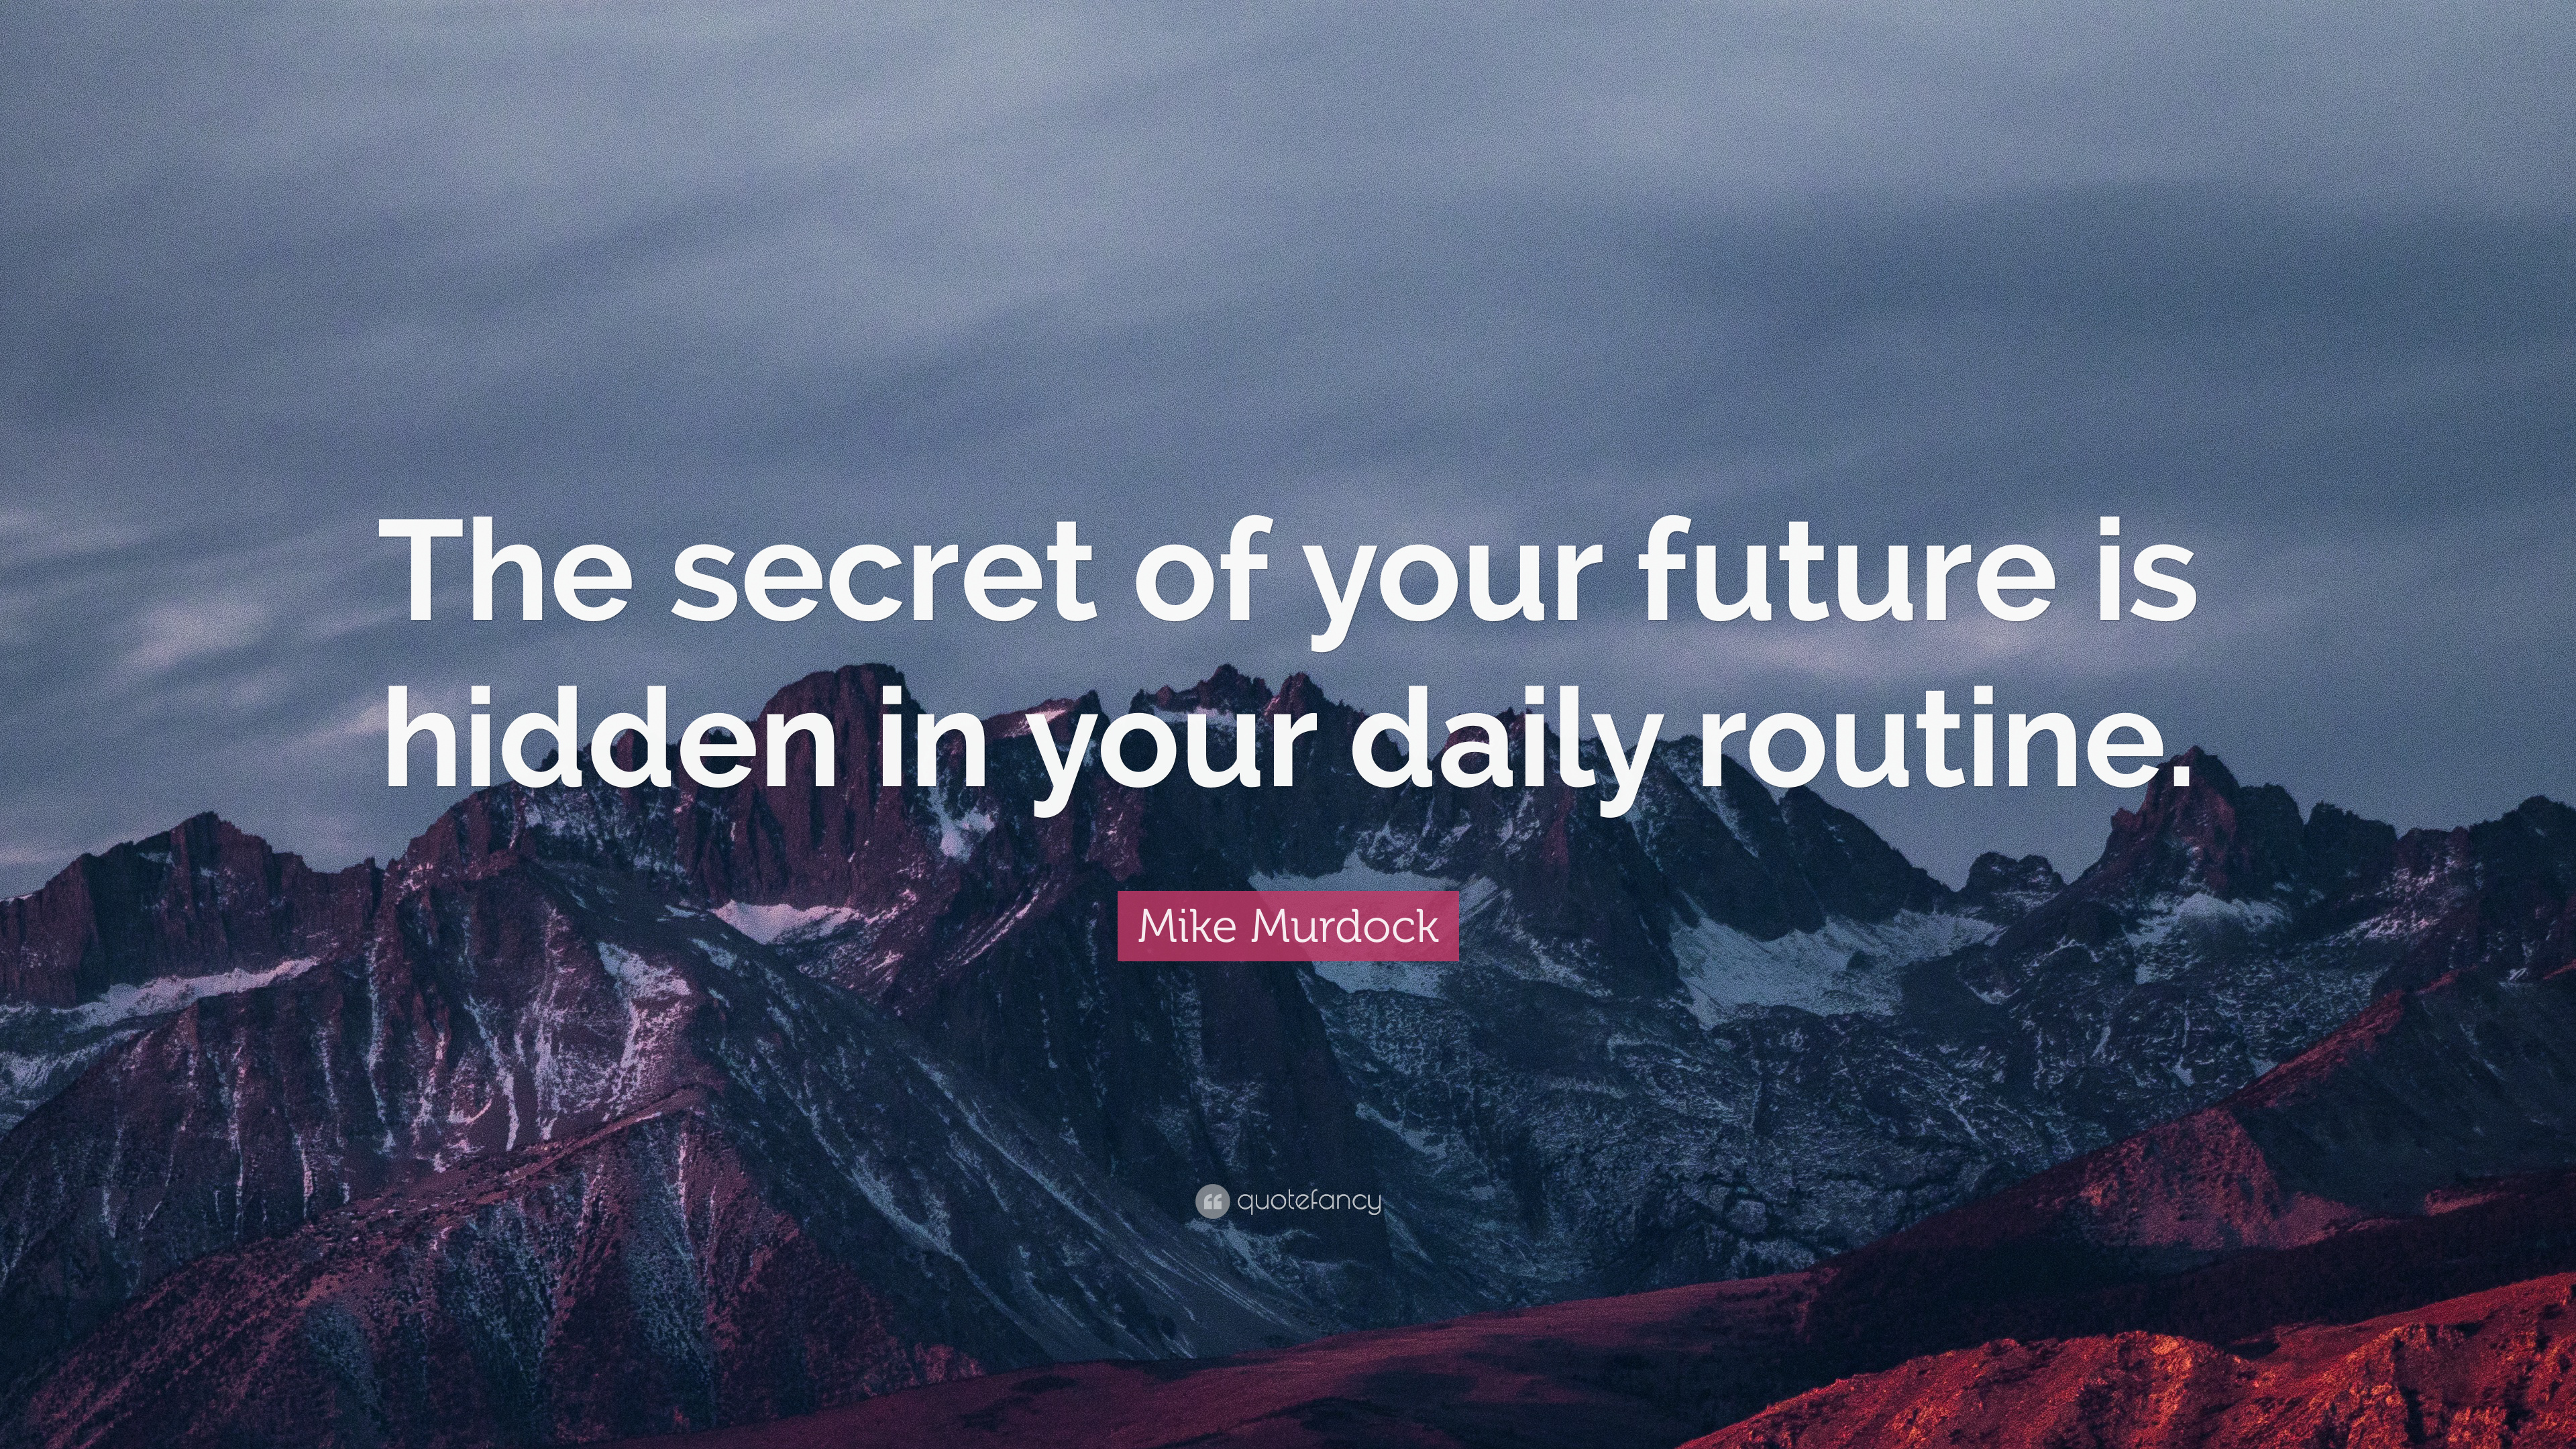 Mike Murdock Quote: “The secret of your future is hidden in your daily routine.”